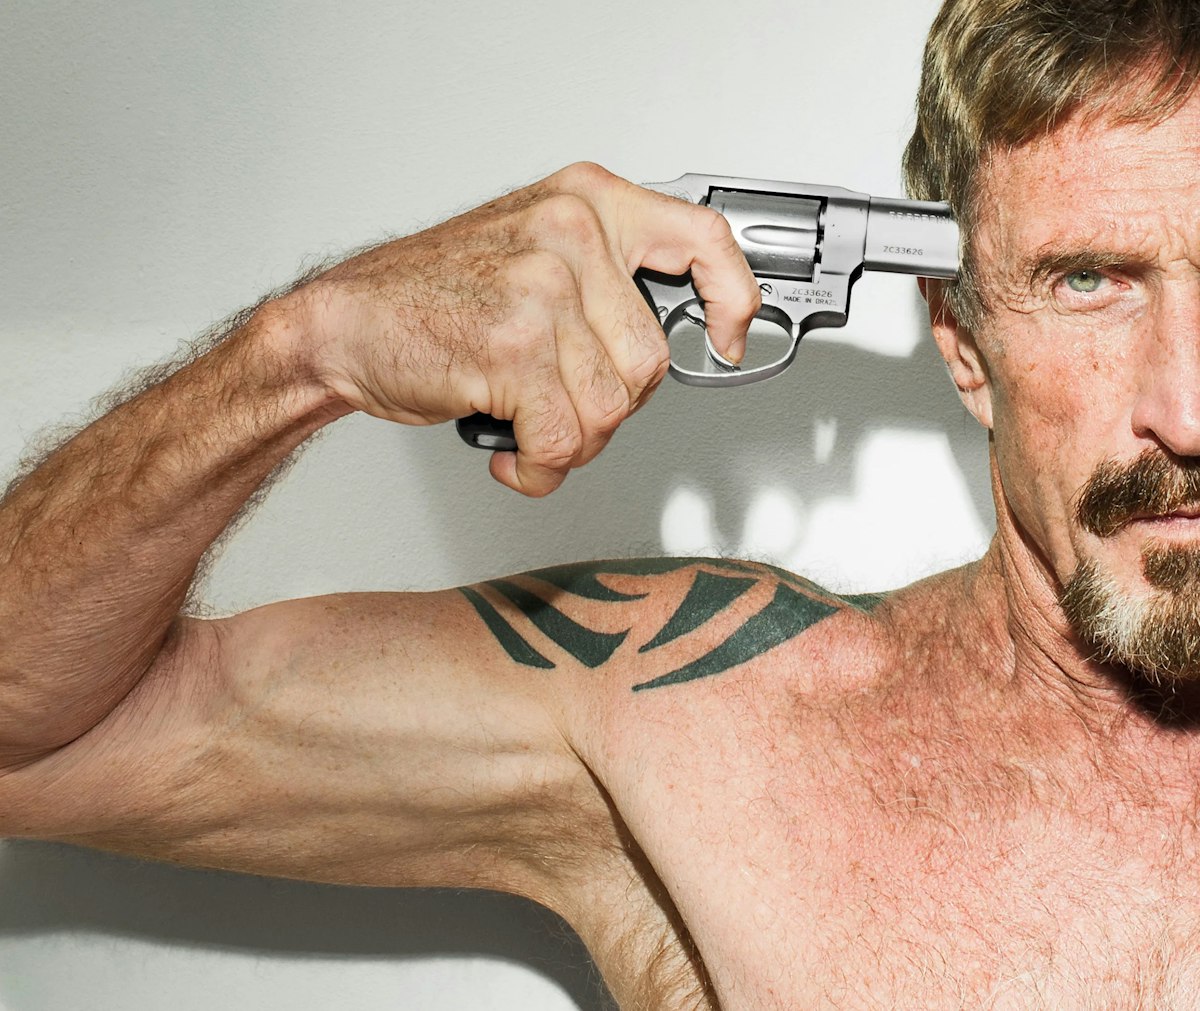 featured image - Could the World be a Safer Place Without John McAfee? 